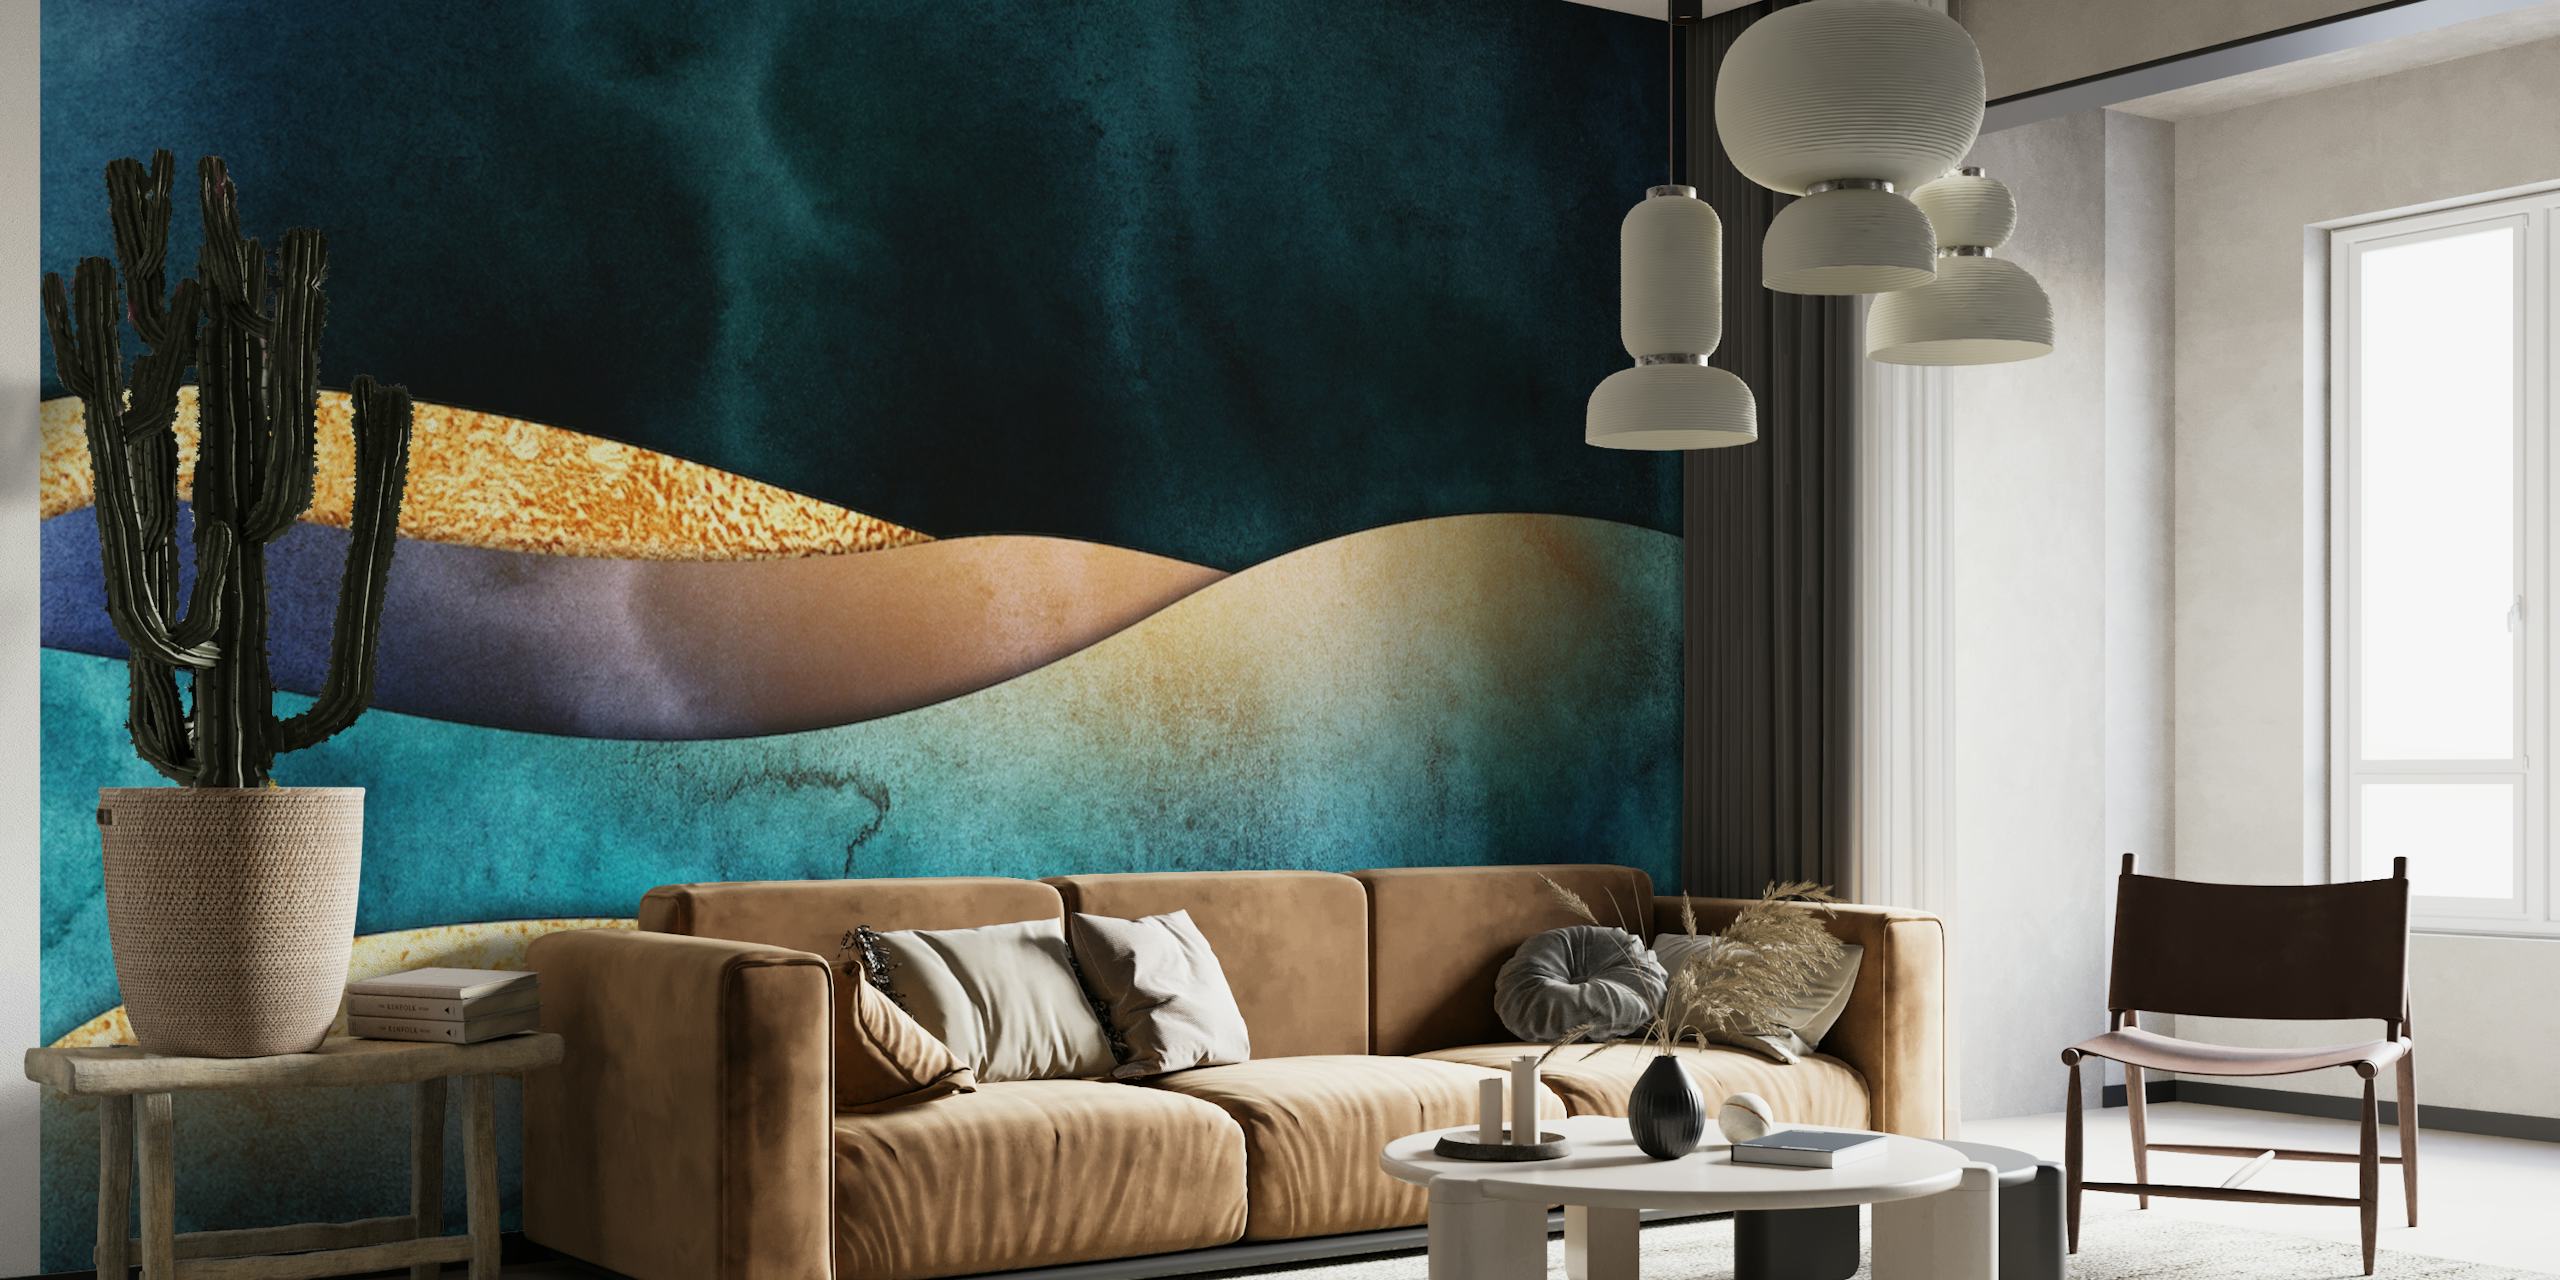 Abstract blue and gold wall mural with a mystic landscape design from happywall.com